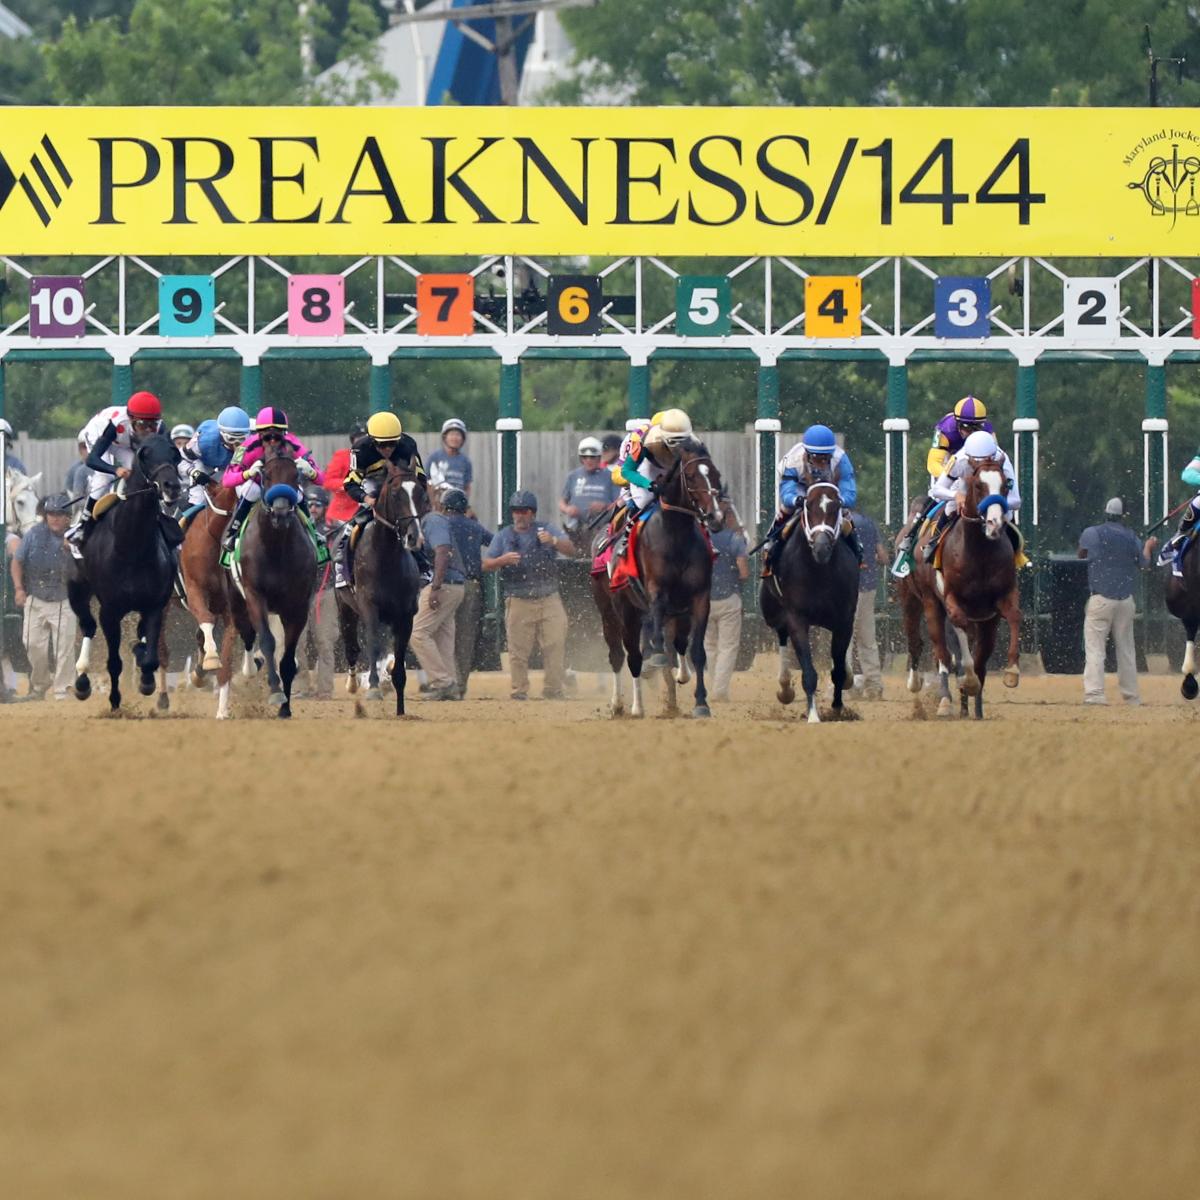 Report Preakness Stakes Eyeing 3 Possible Dates for 2020 Triple Crown